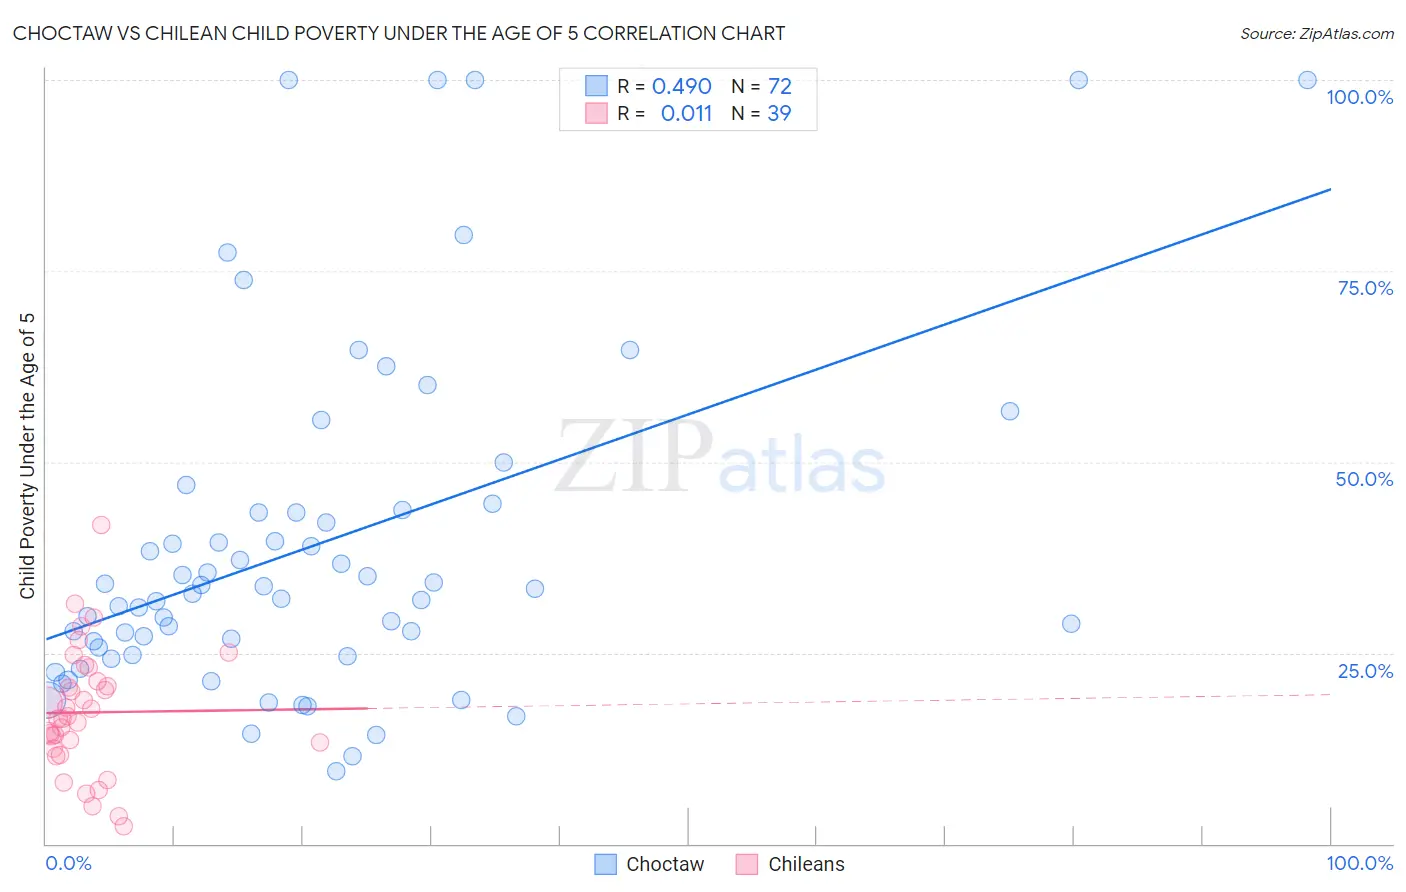 Choctaw vs Chilean Child Poverty Under the Age of 5